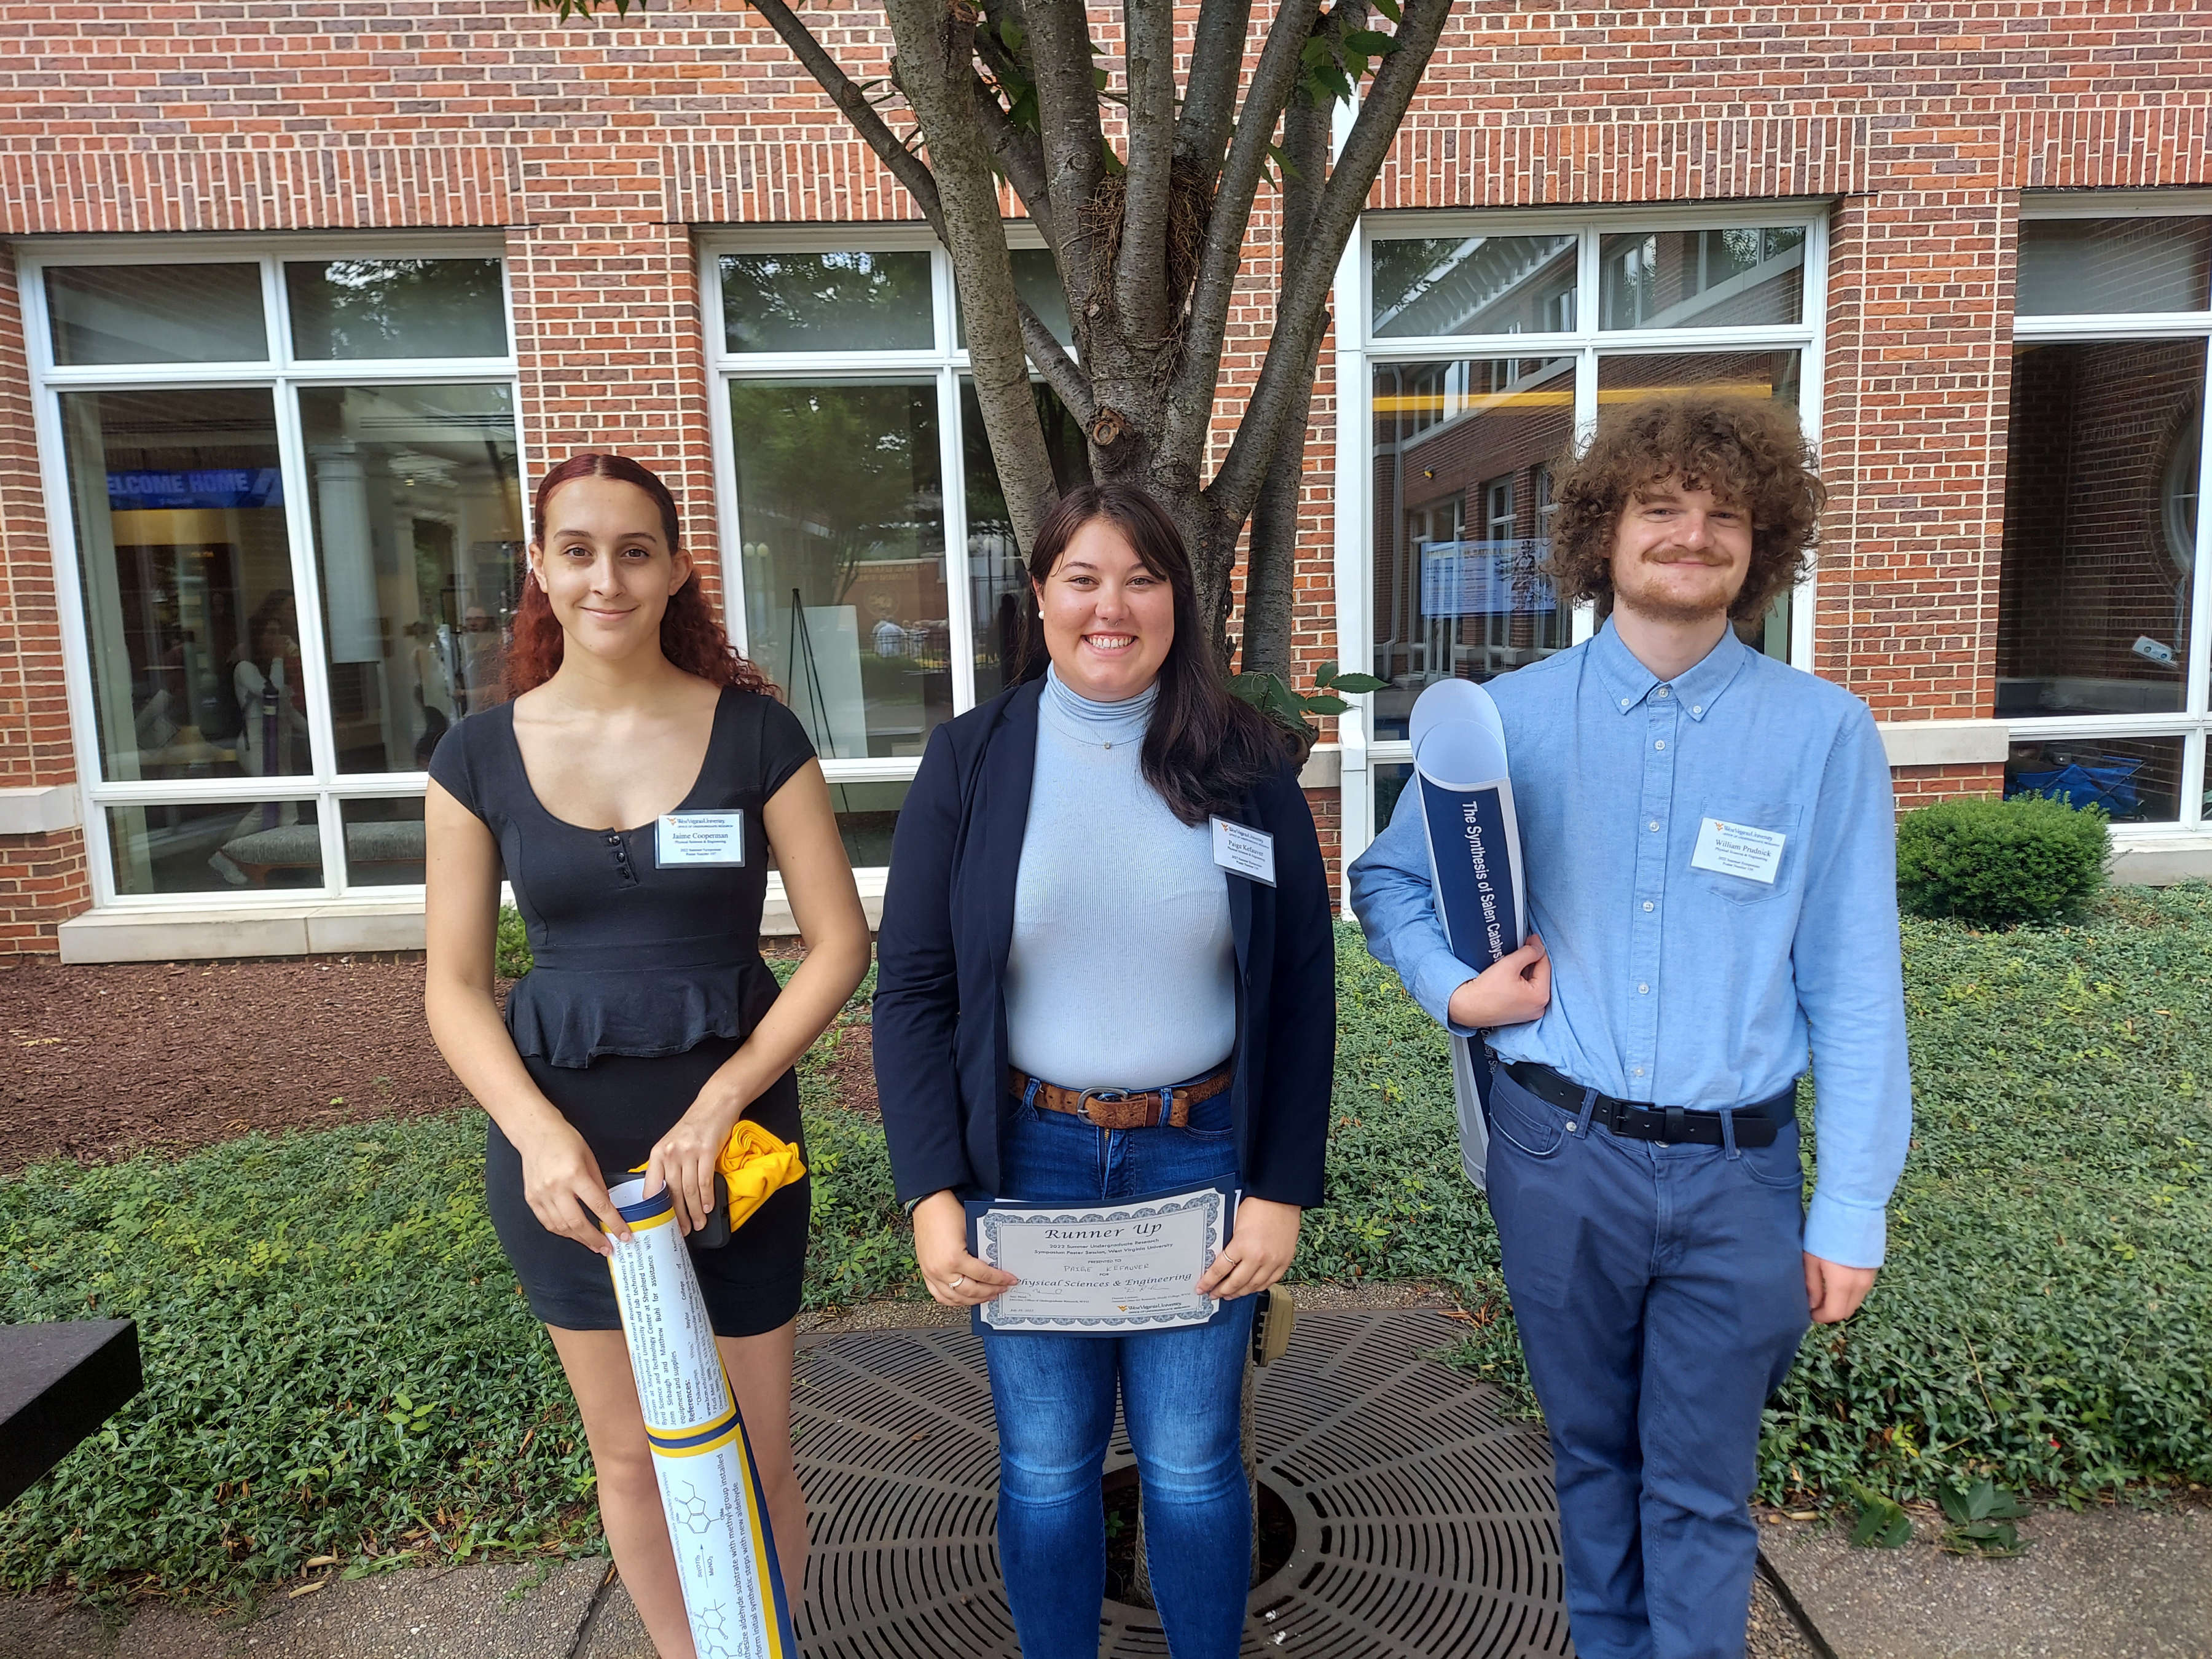 Photo of Jaimie Cooperman, Paige Kefauver, and William Prudnick standing in front of building and tree.